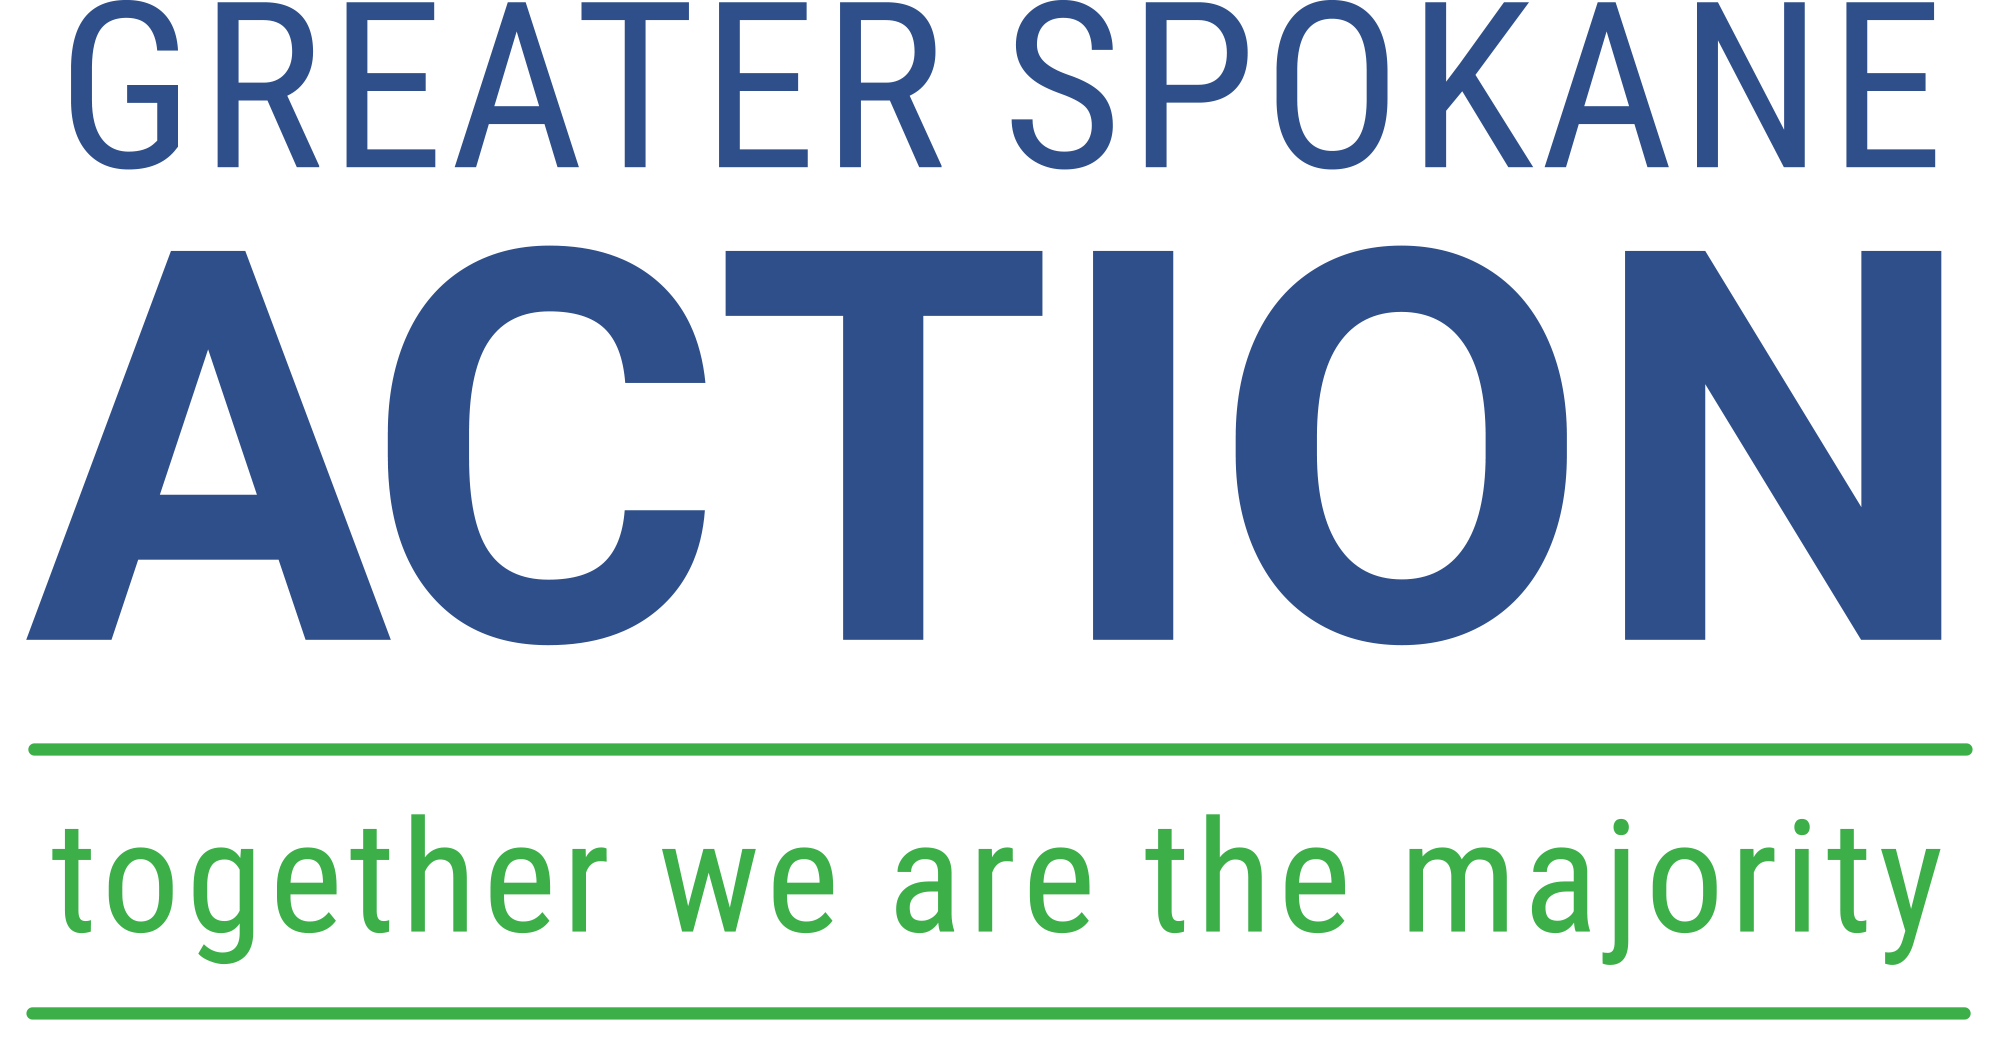 Greater Spokane Action - Together we are the majority